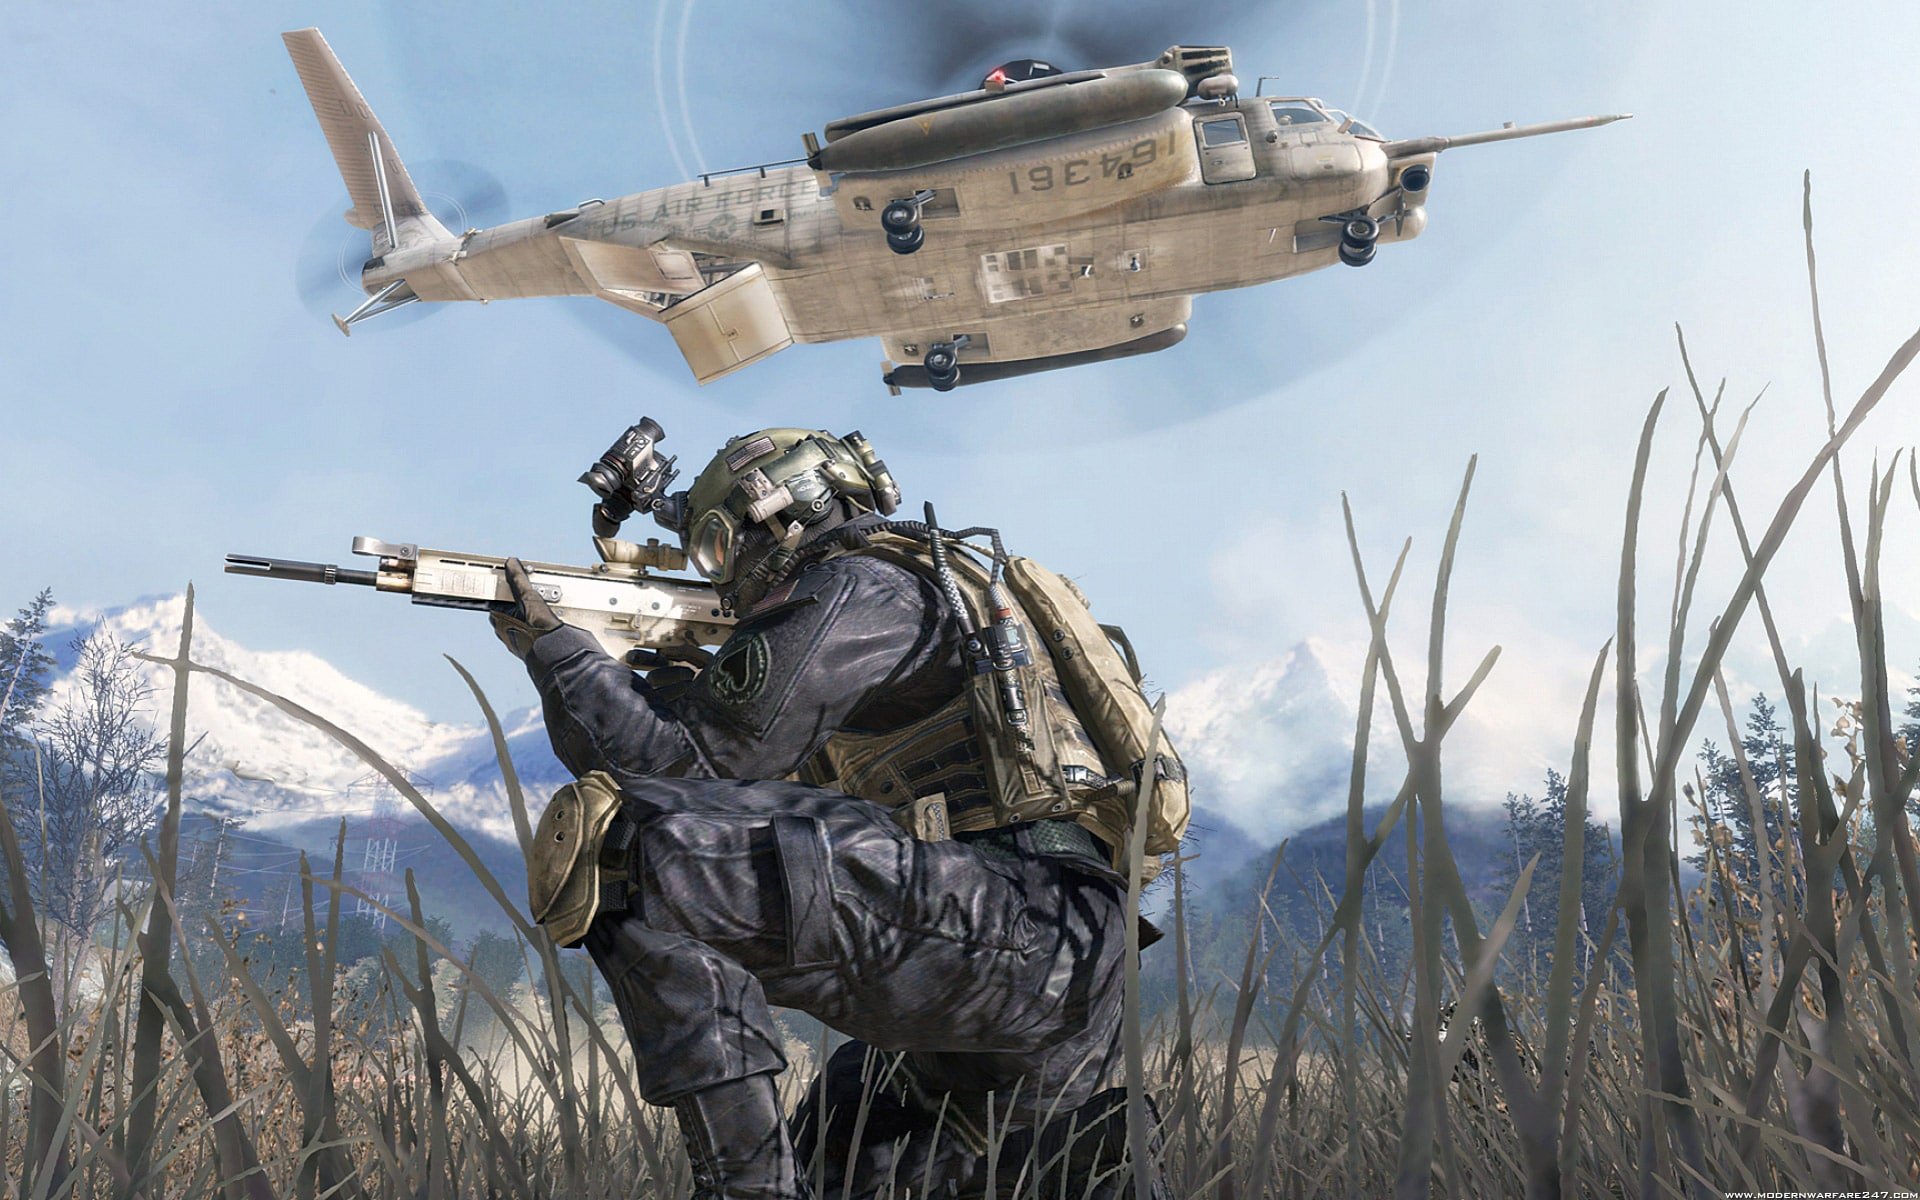 2022's Modern Warfare 2 to release new Warzone map with classic POIs